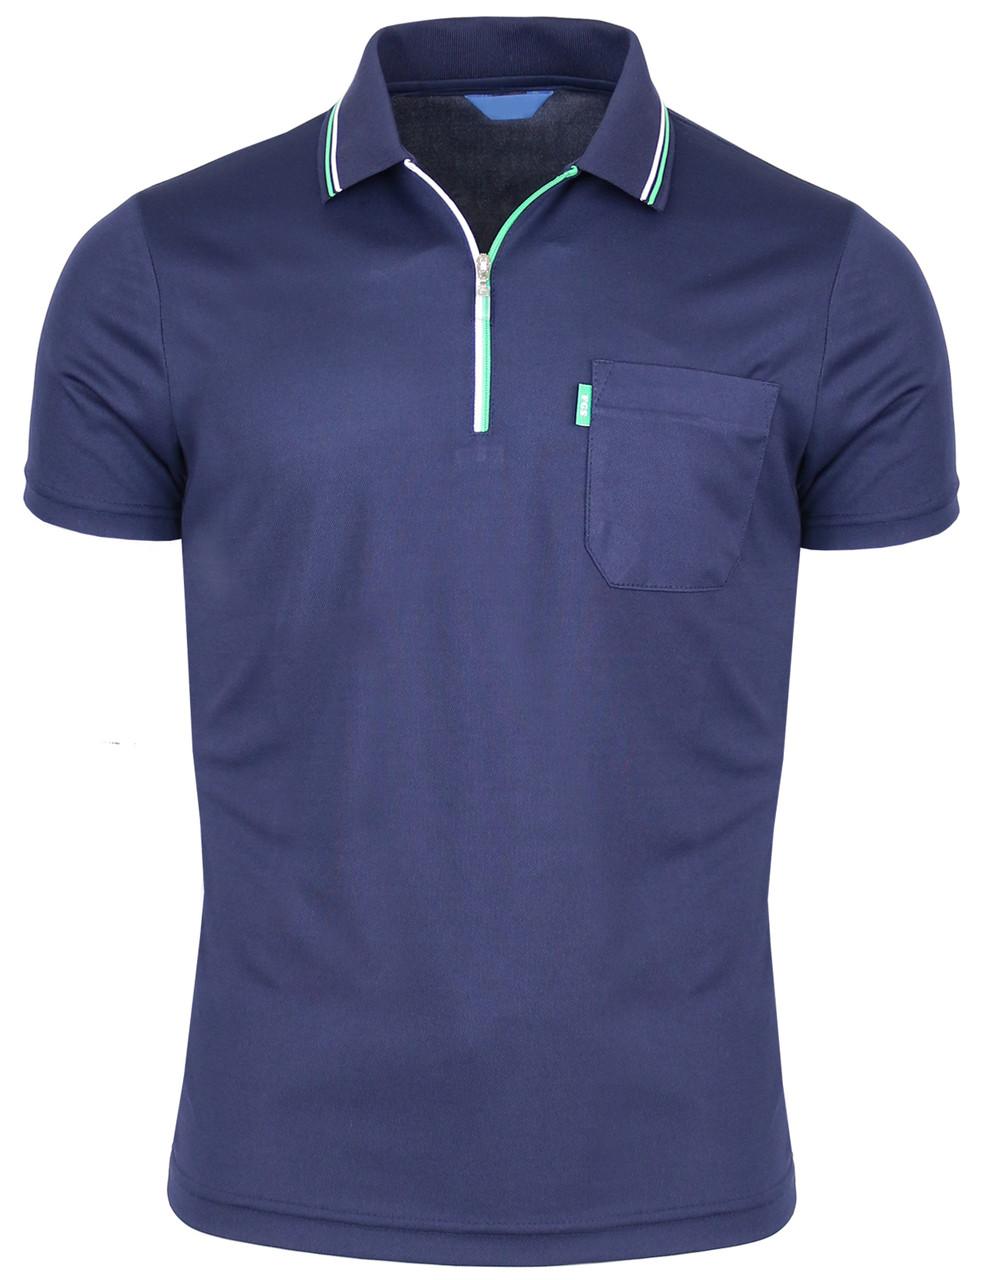 polo shirt dry fit